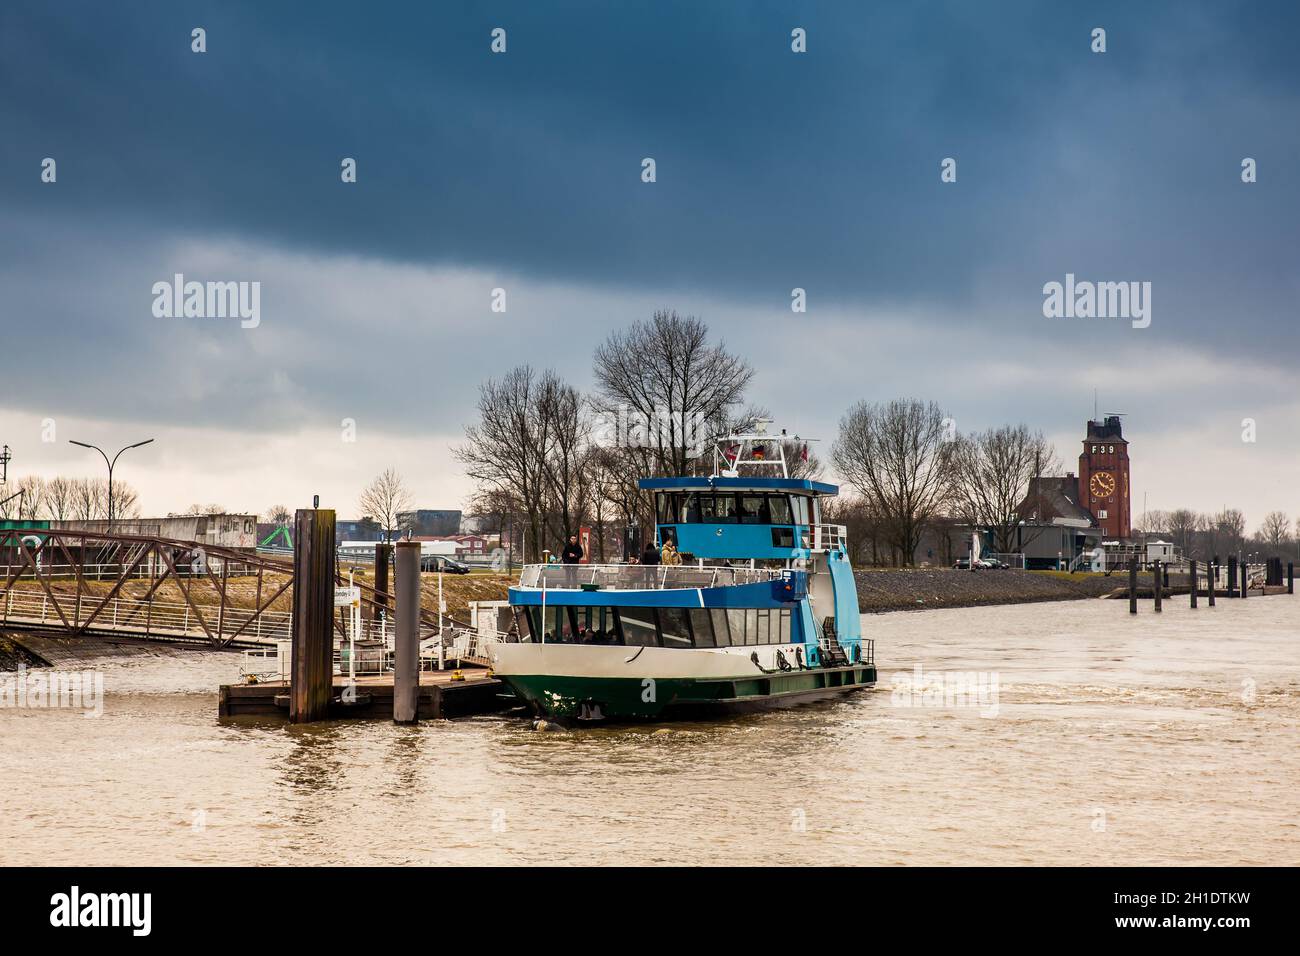 HAMBURG, GERMANY - MARCH, 2018: Ferry navigating on the Elbe river in a cold cloudy winter day in Hamburg Stock Photo